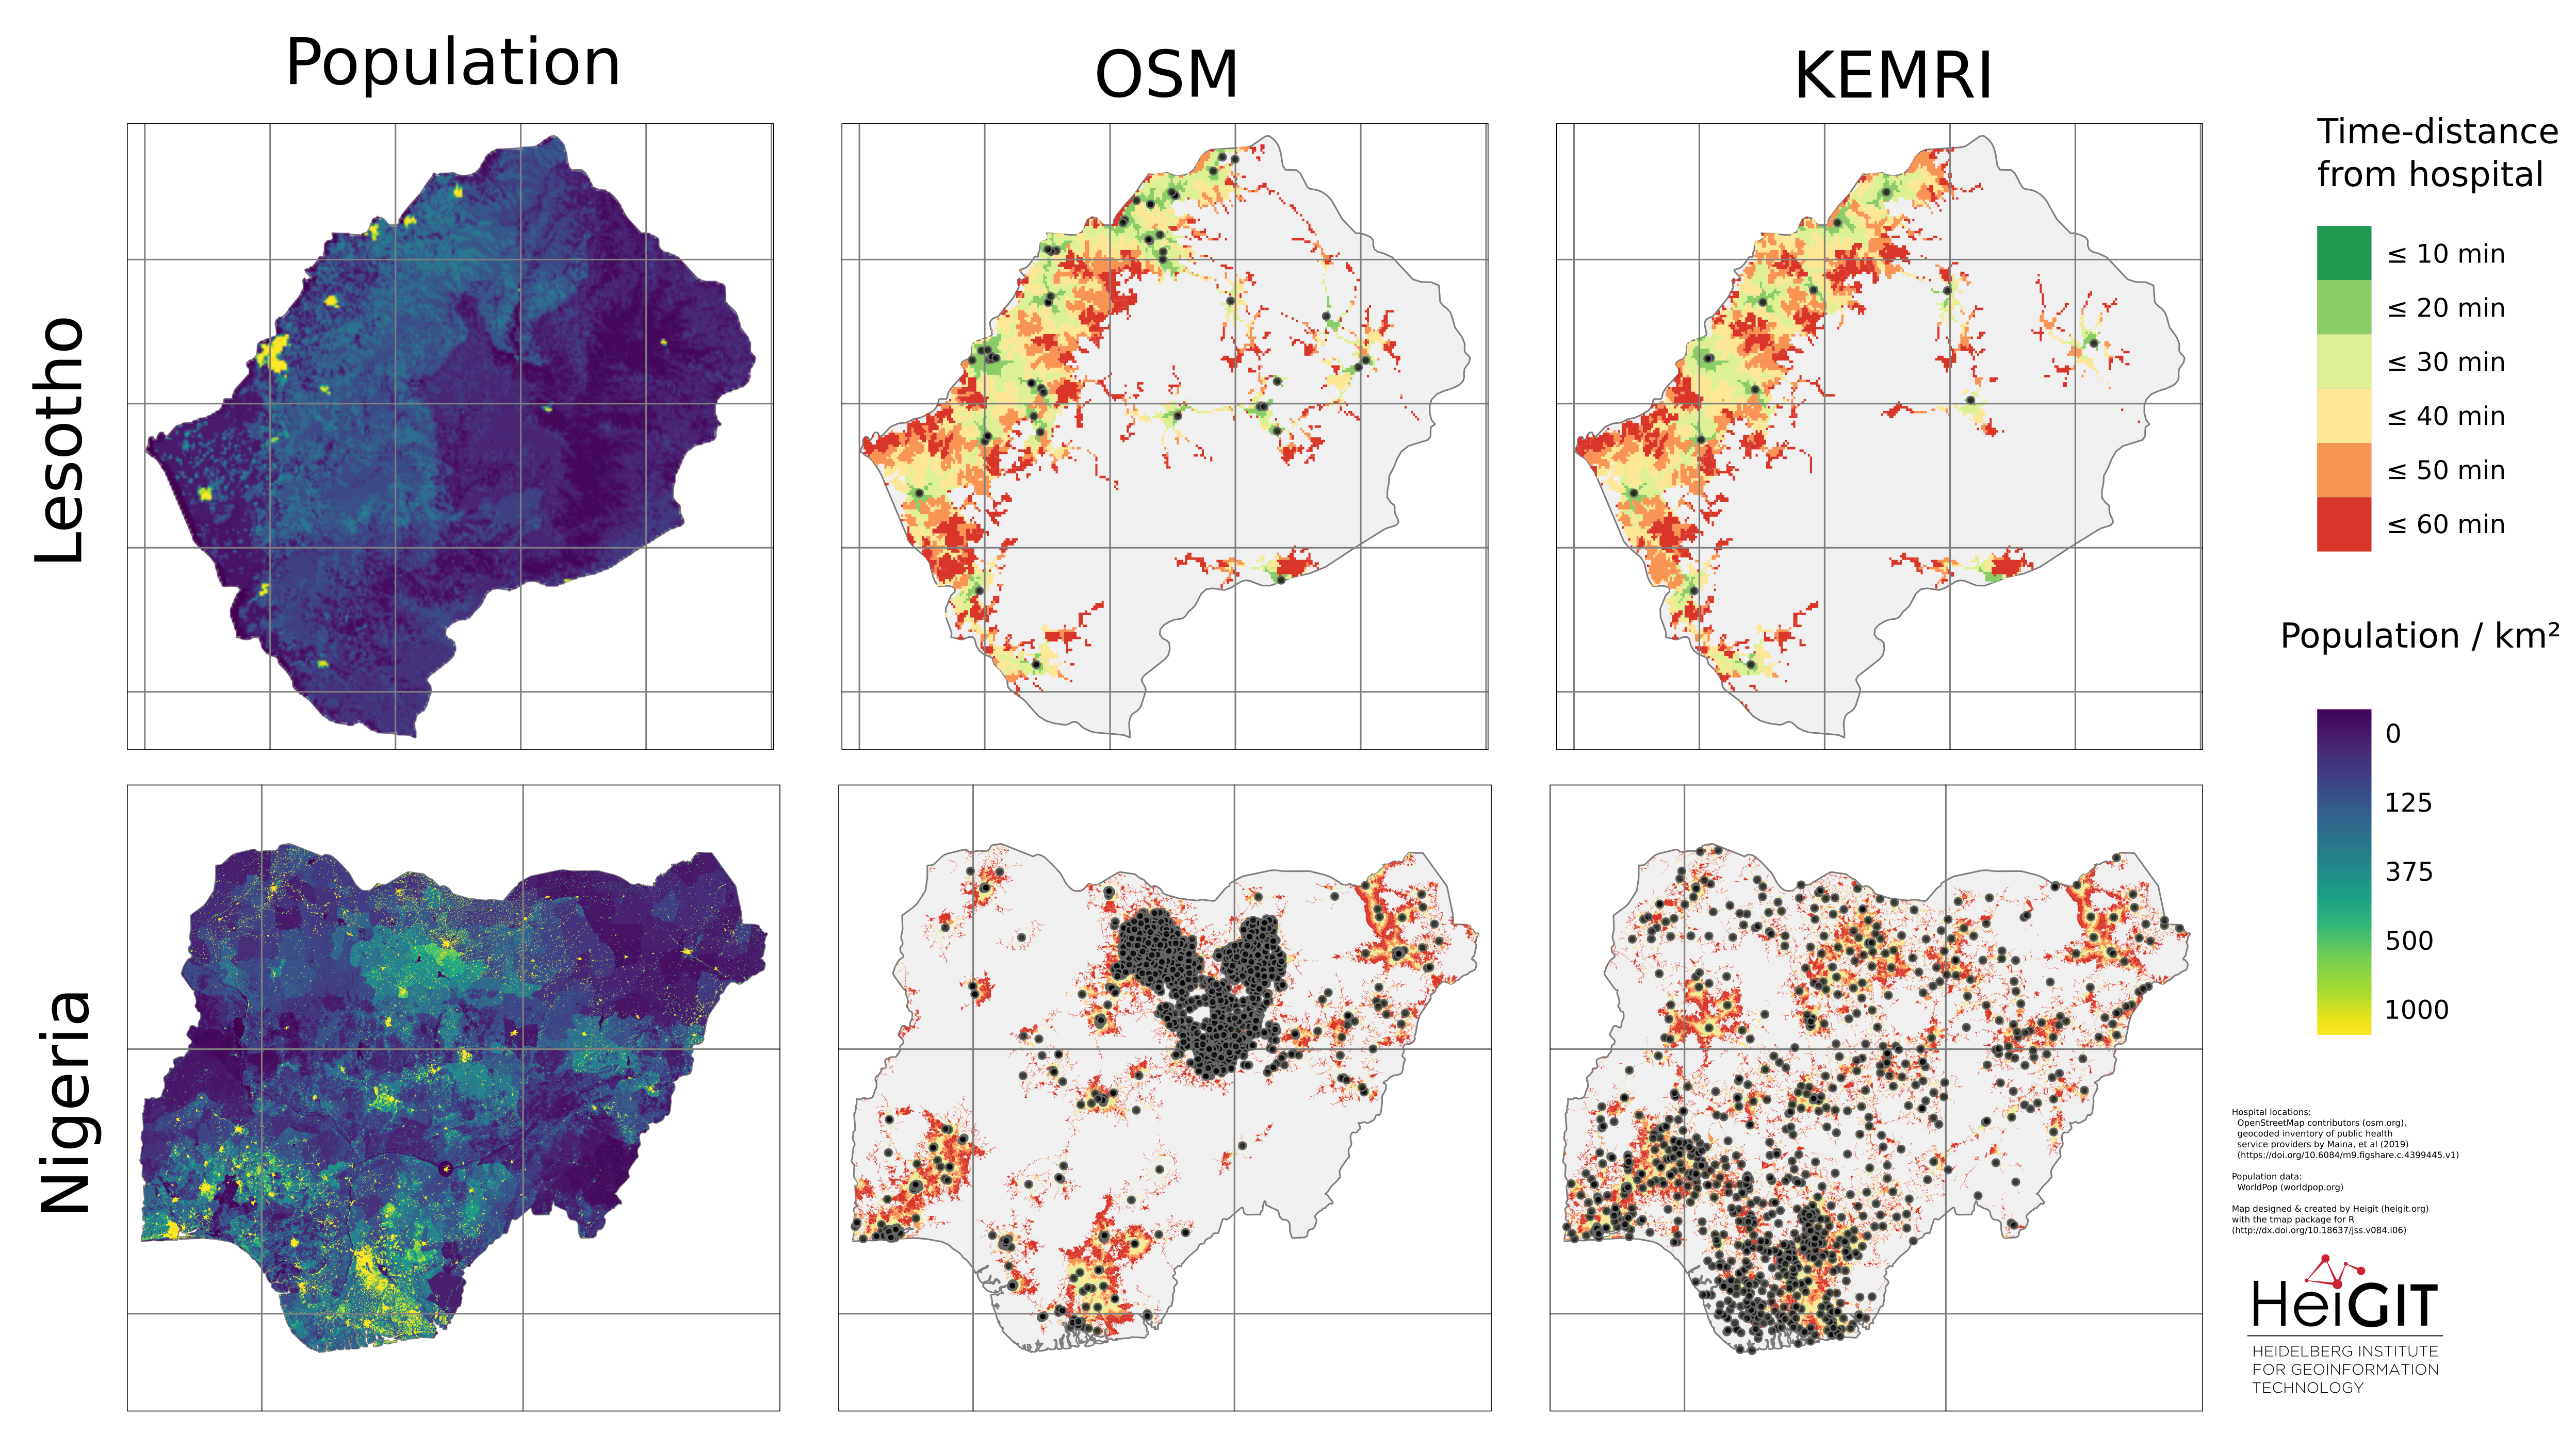 Figure 3 Maps on distribution of population, time-distance from hospitals and hospital locations for OSM and KEMRI. (HeiGIT 2020)